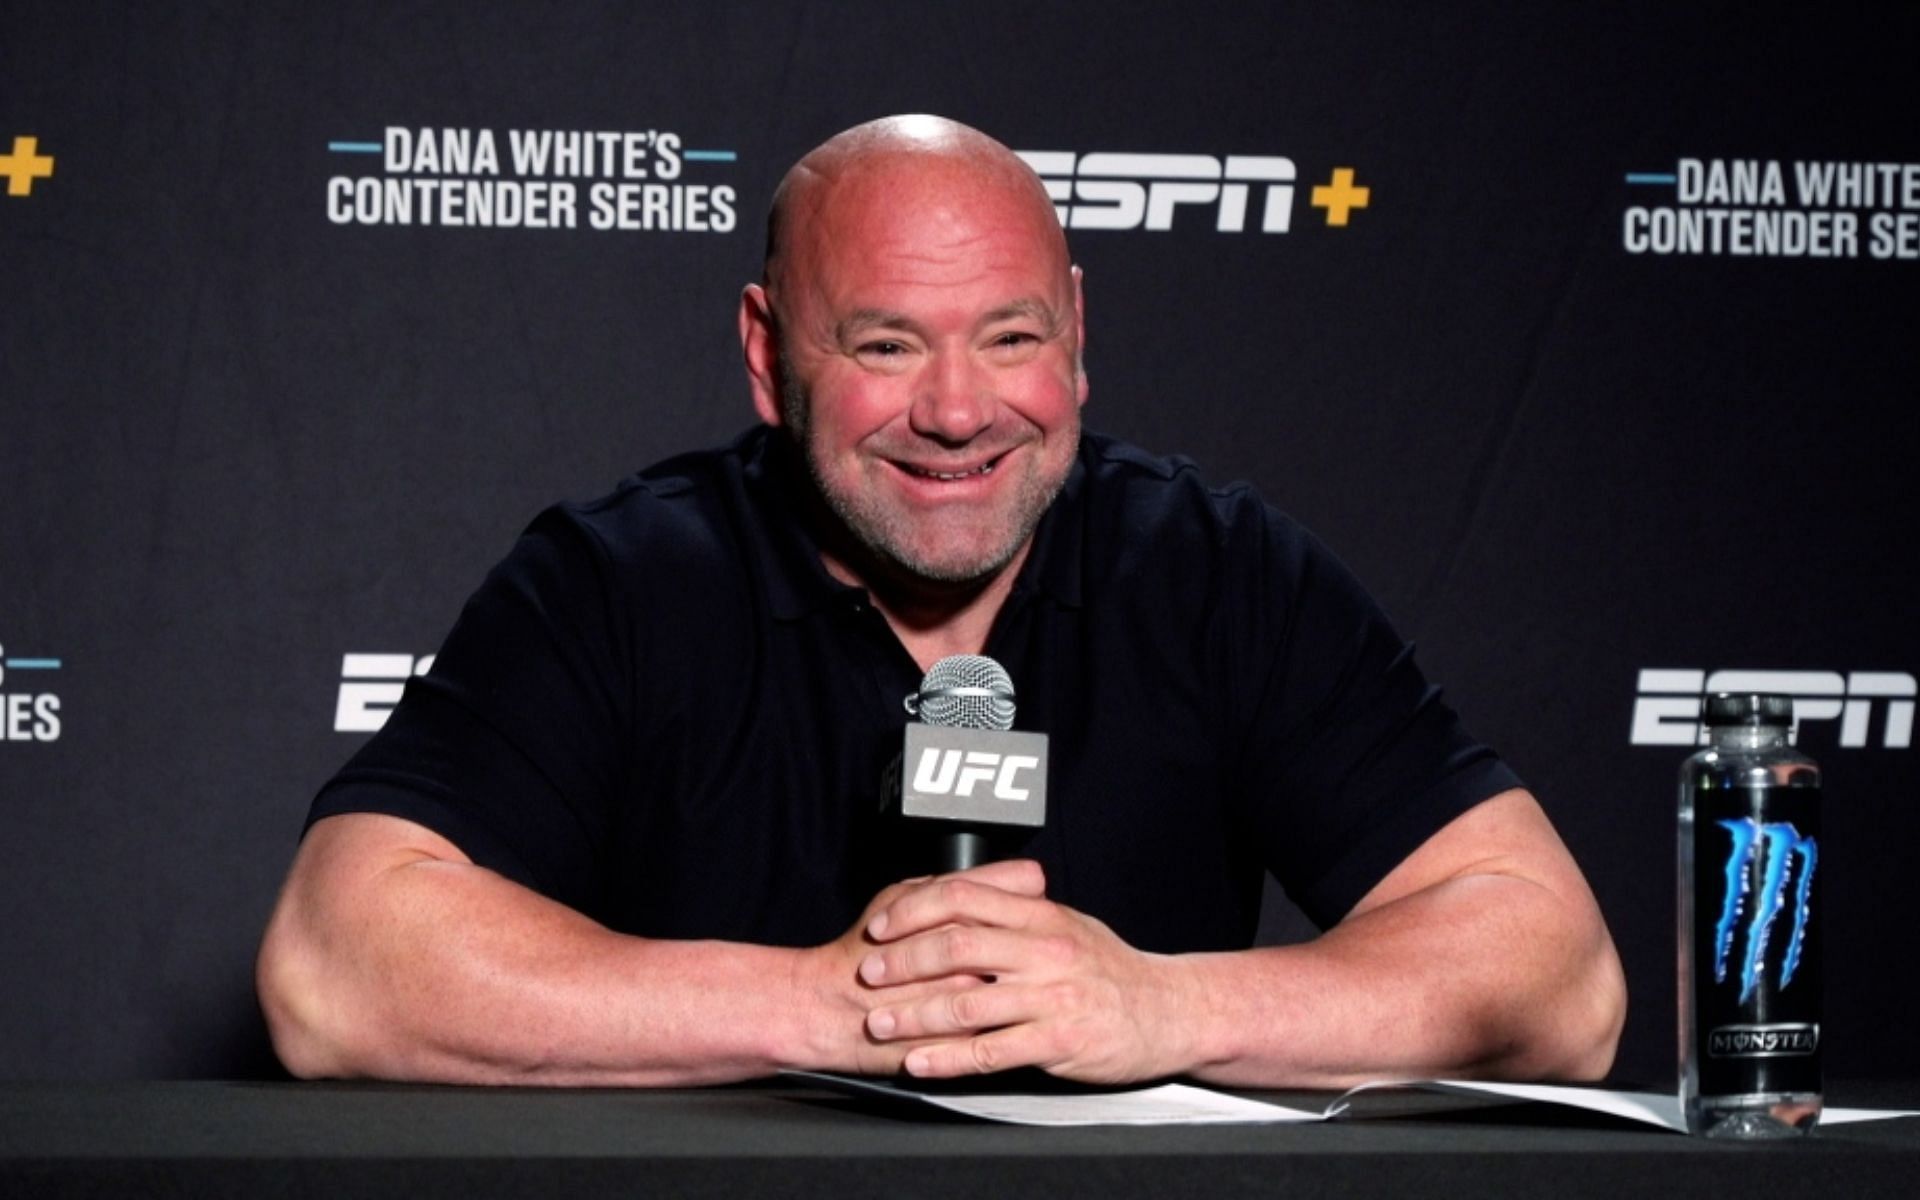 If Dana White had his way, who would be holding UFC titles right now?